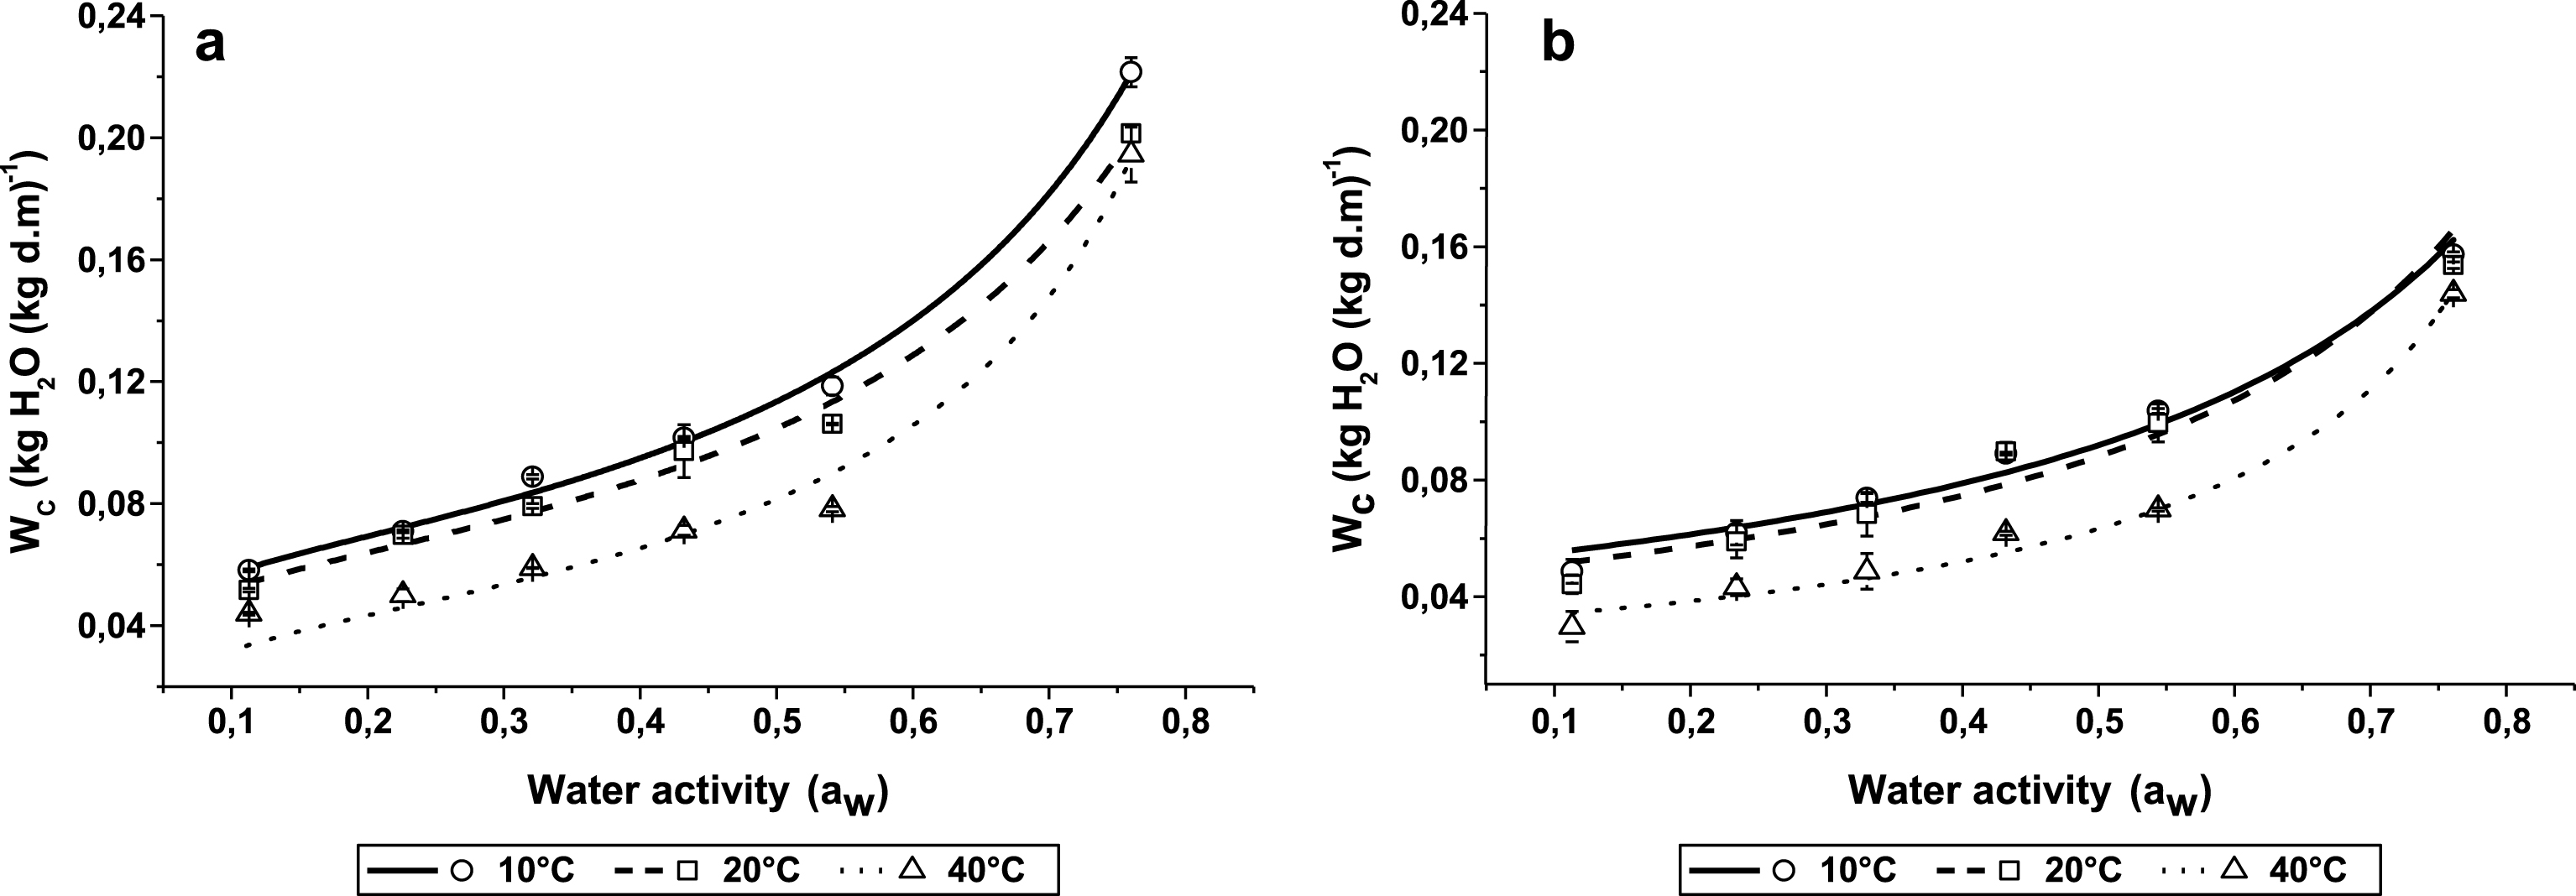 Temperature influence on the sorption isotherms of freeze–dried BC/YM (a) and YM (b) at 10, 20 and 40°C. The lines represent the equilibrium moisture contents predicted by the GAB model.